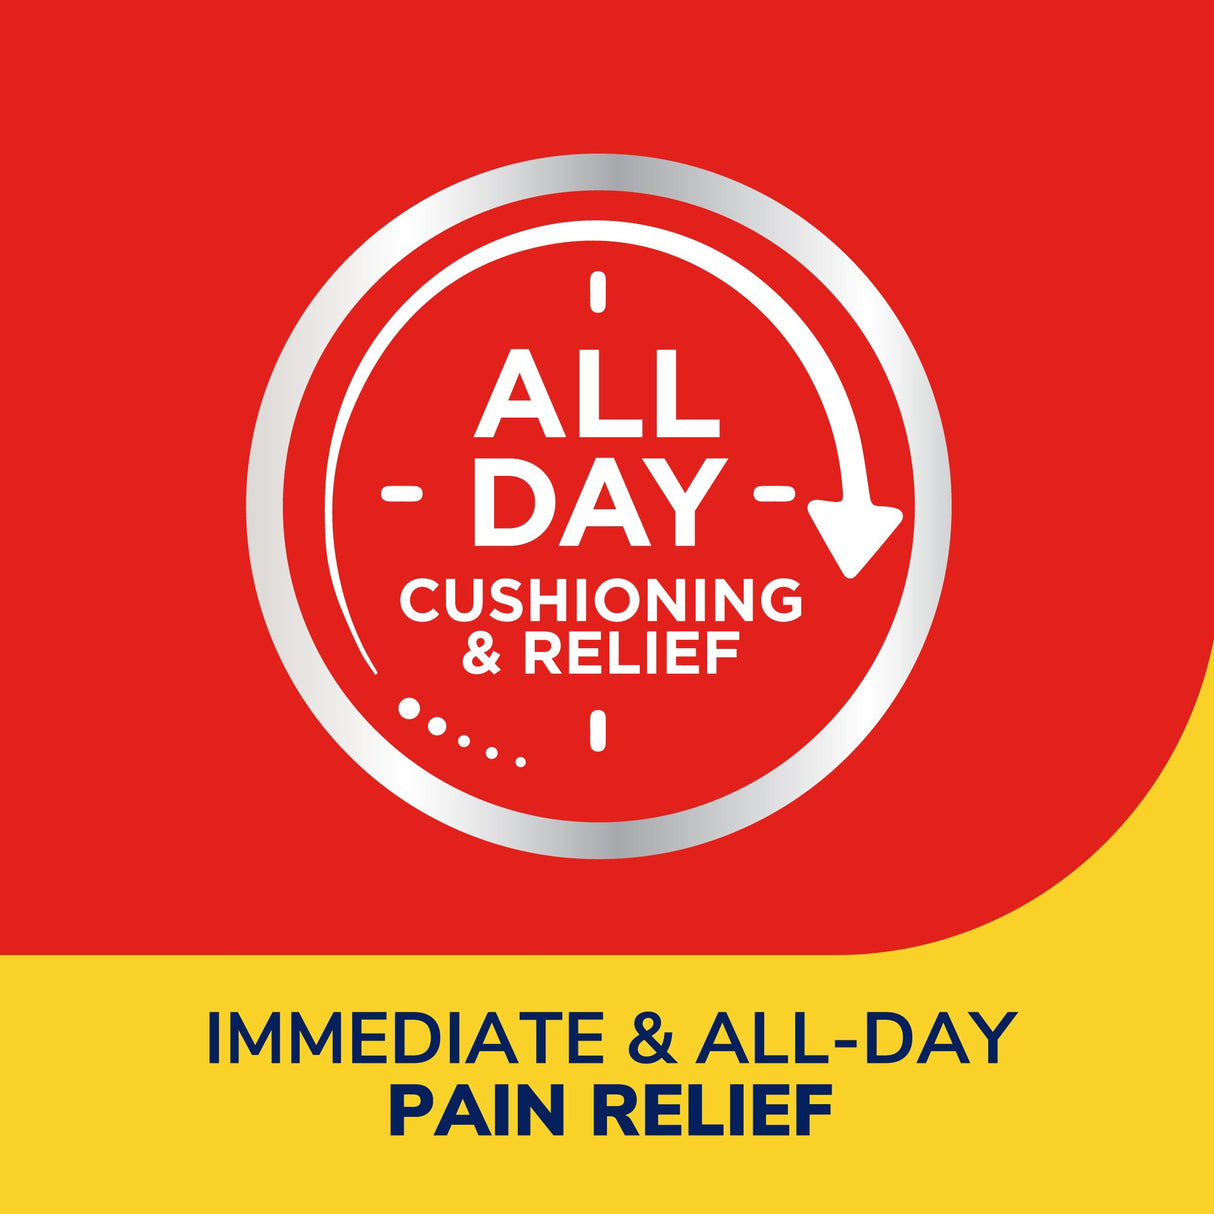 image of all day cushion & relief